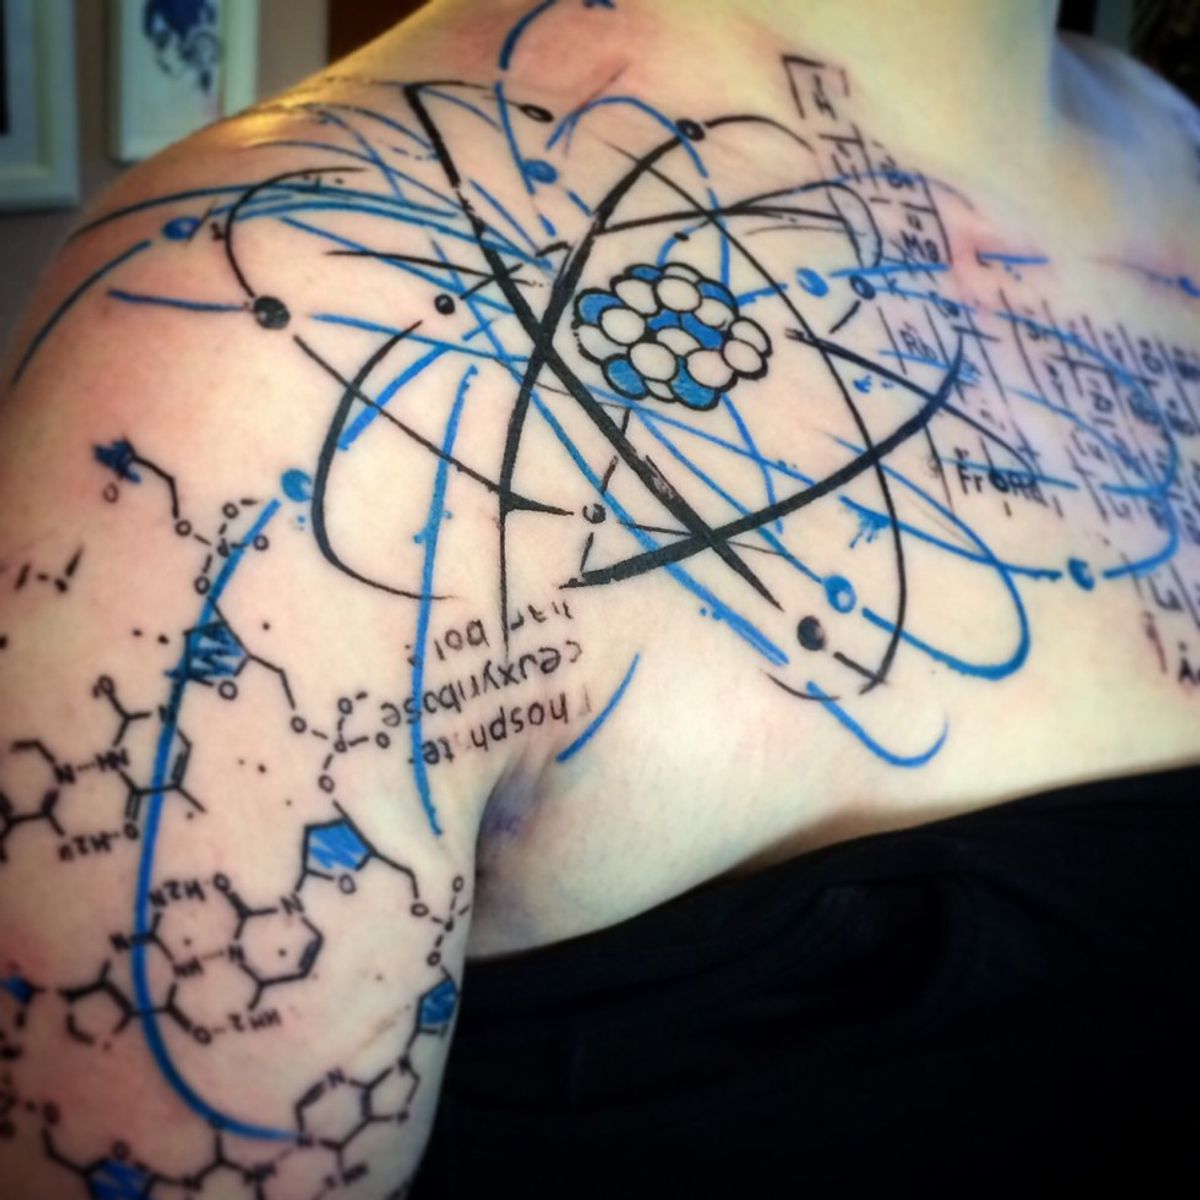 Tattoos May Be Helping Our Immune System